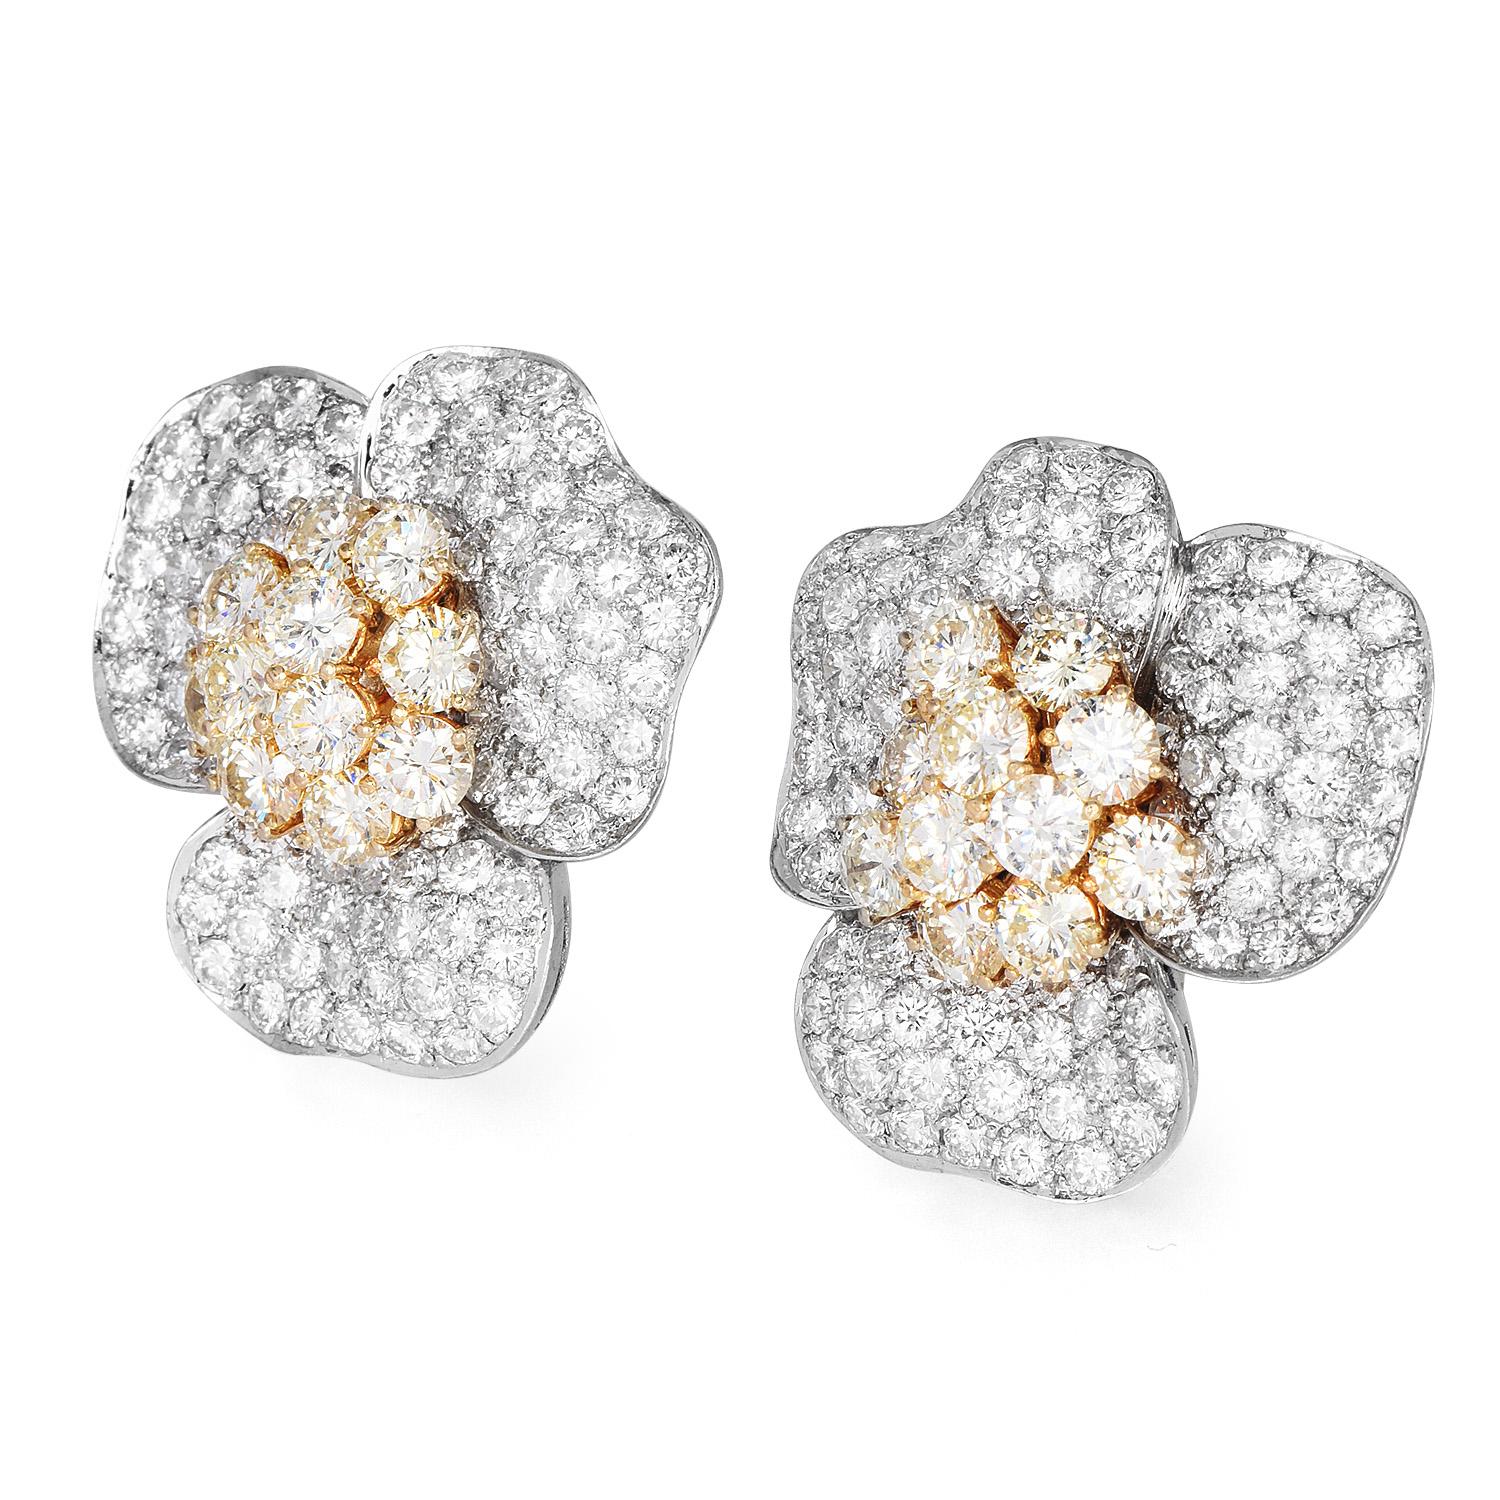 Create a Majestic look with these stunning earrings!

These Stylish 18K Two-Toned Gold Pave Diamond Earrings were

inspired by a Large Flower motif.

Bright white & yellow Pave set Diamonds mounted in white & yellow gold adorn the center of the